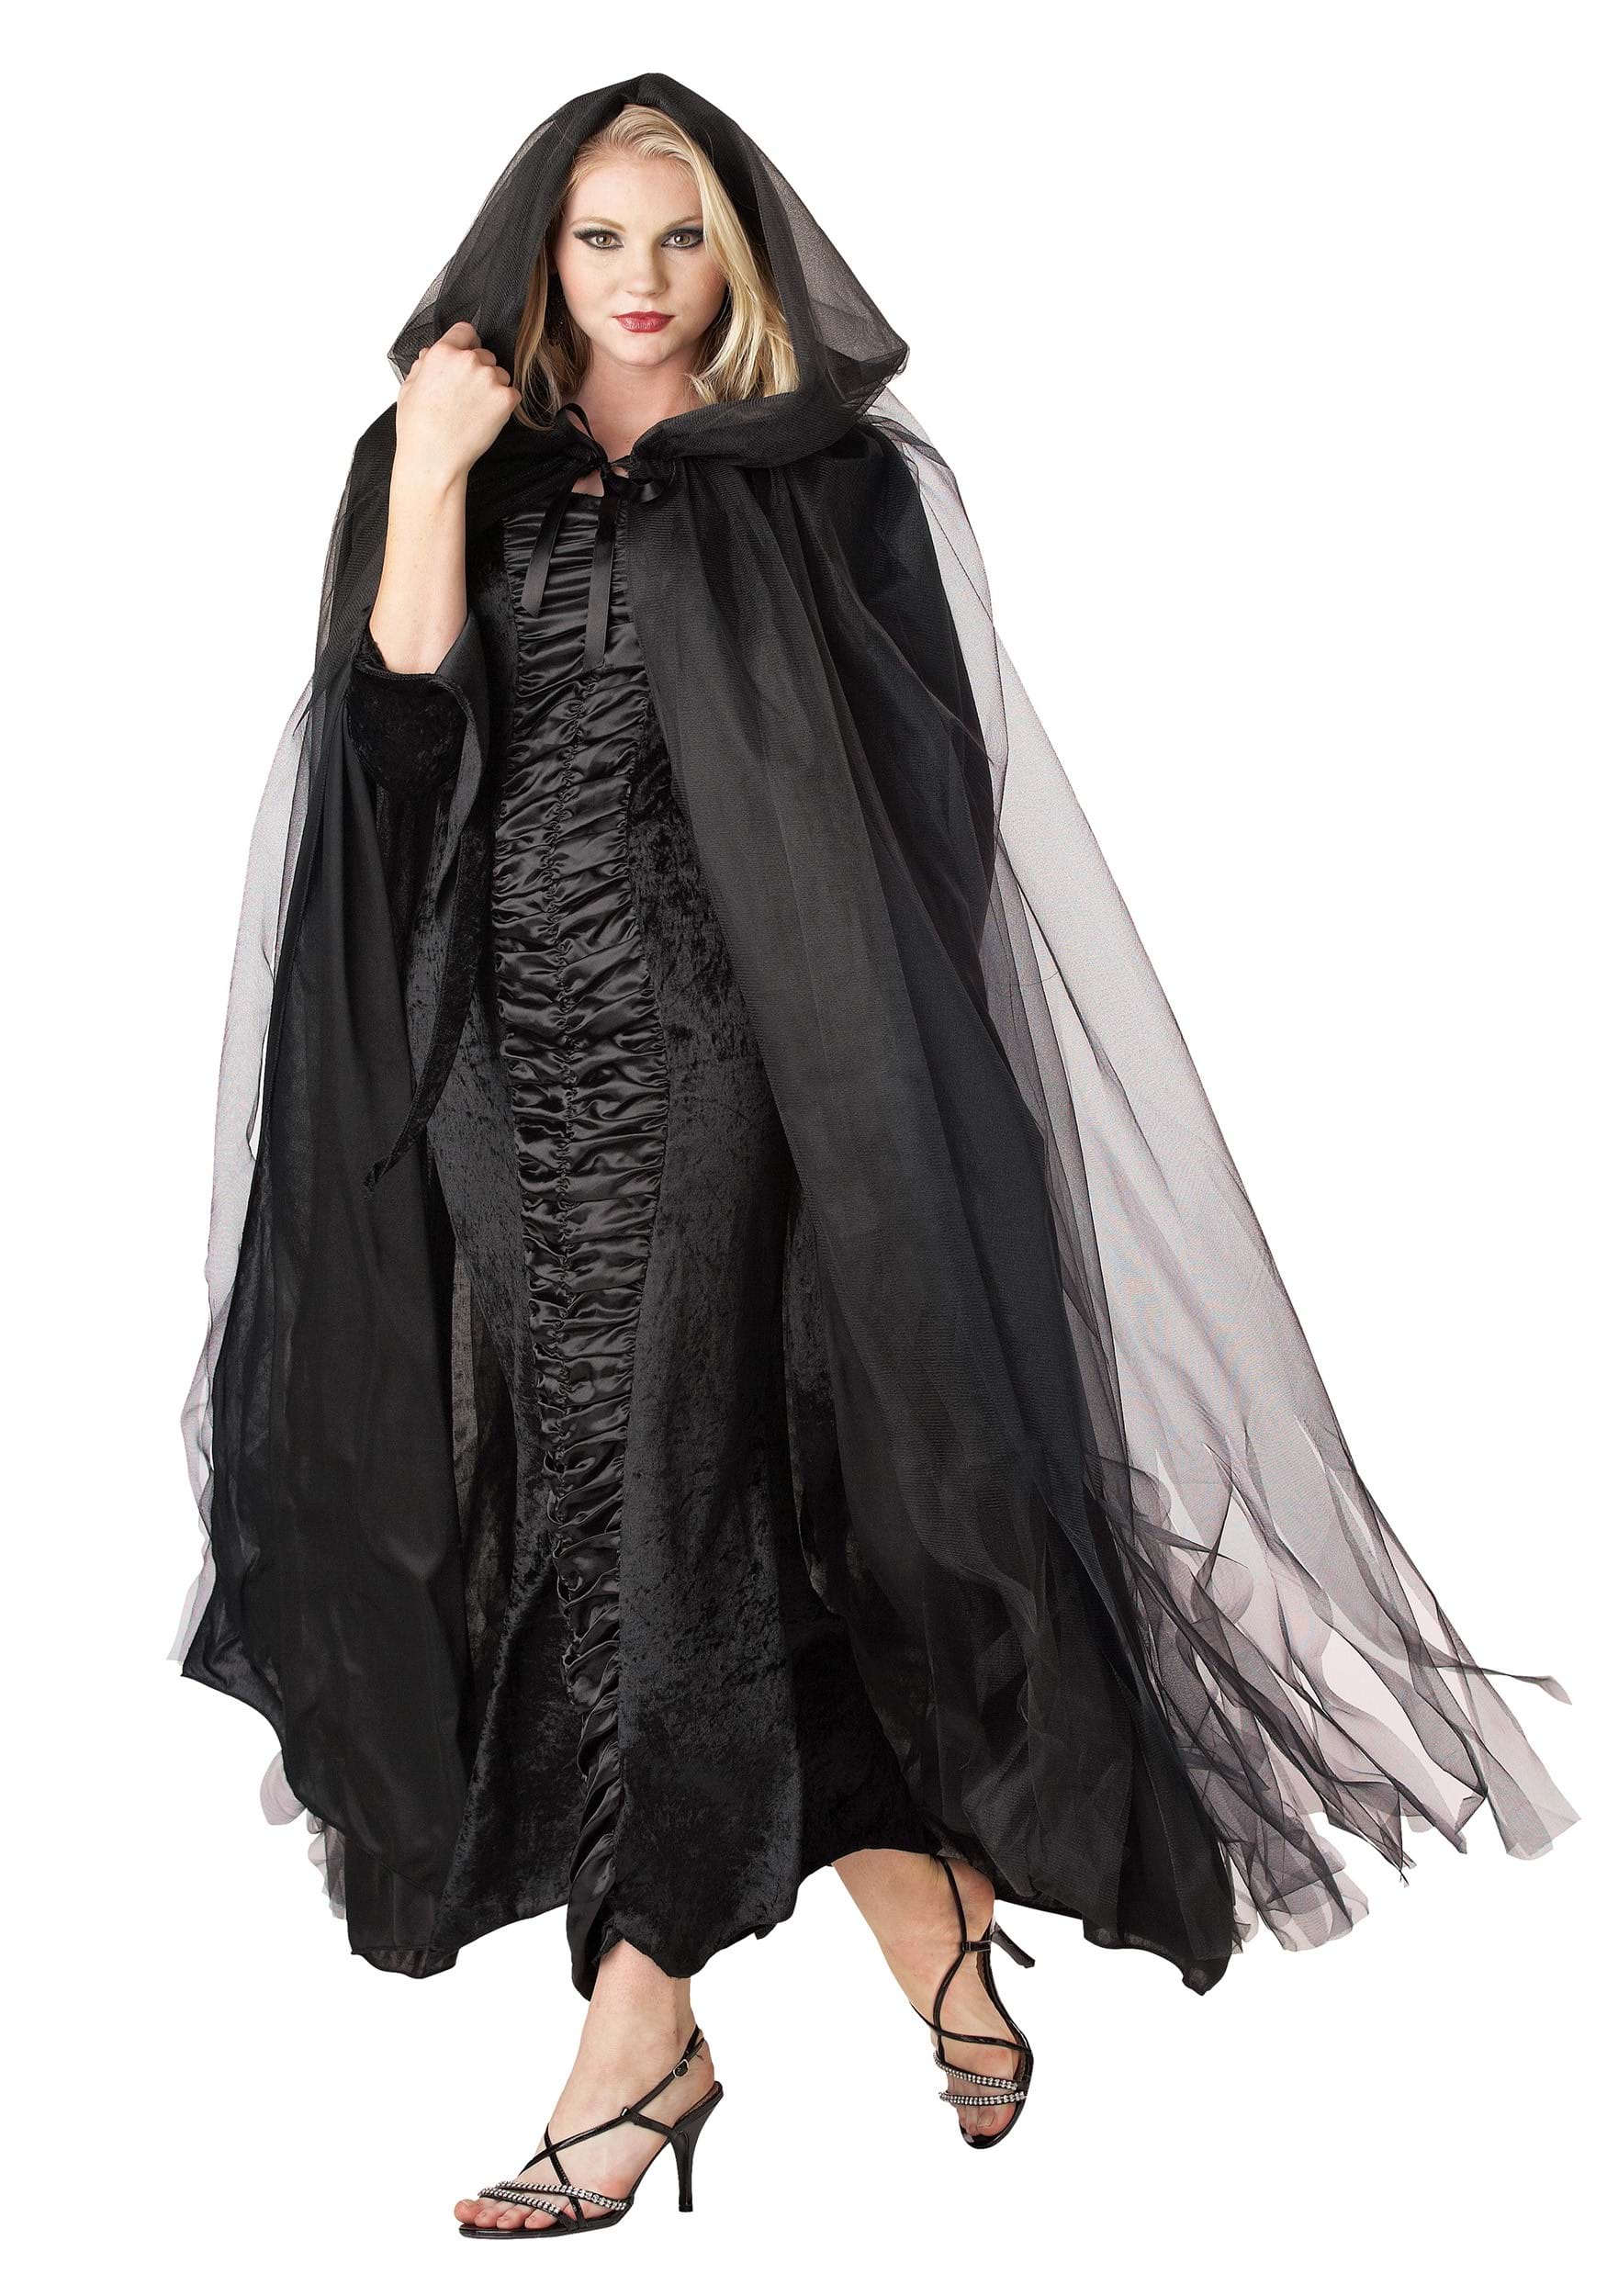 Midnight Black Cape For Adults , Fancy Dress Costume Capes